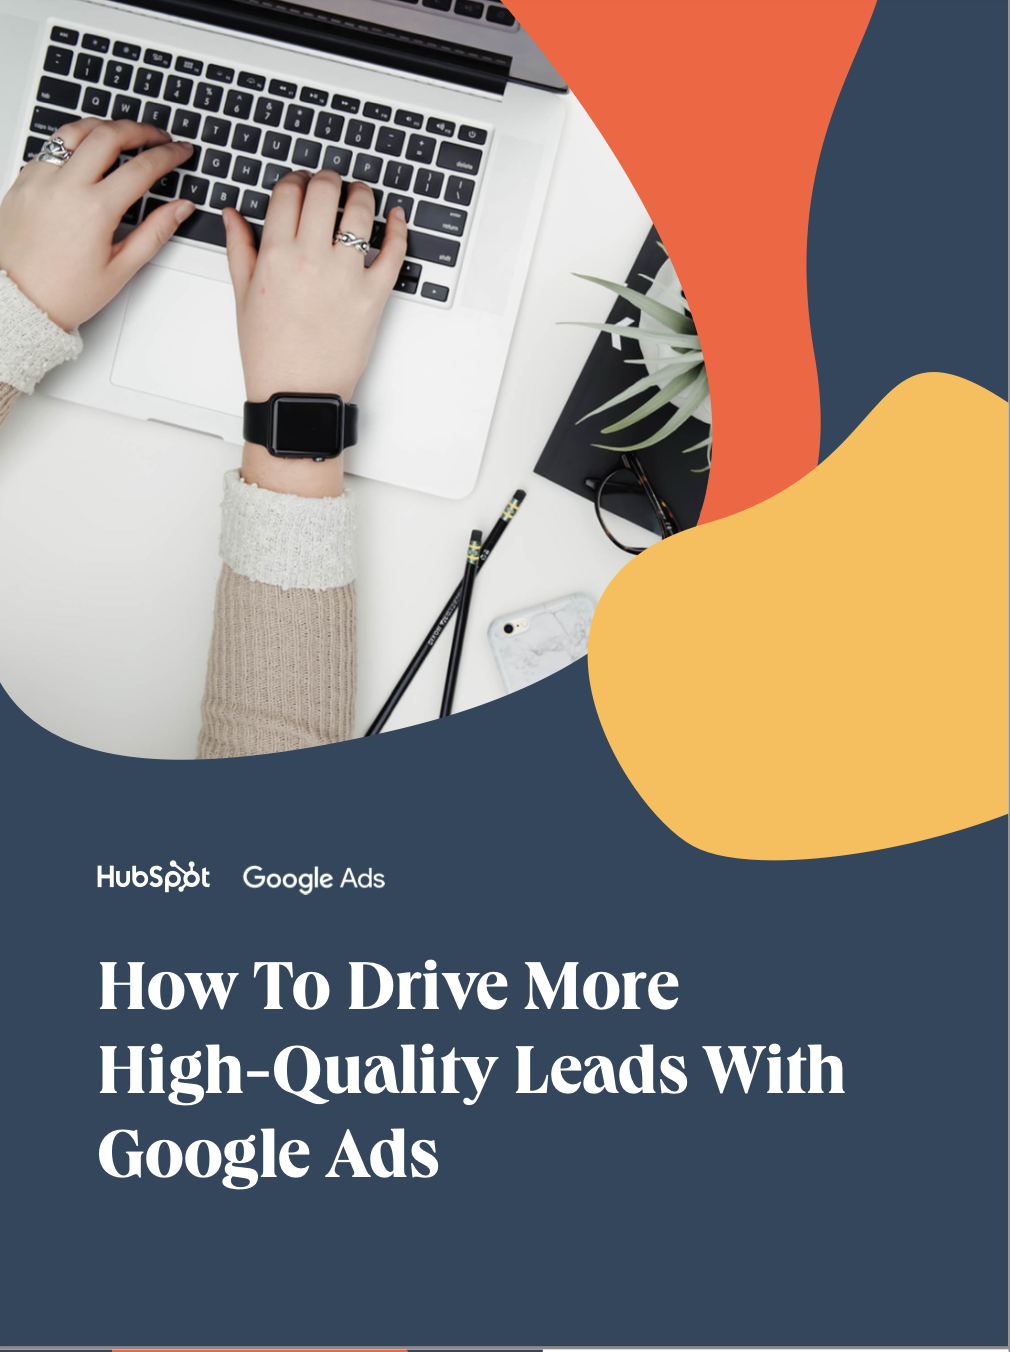 How To Drive More High-Quality Leads With Google Ads